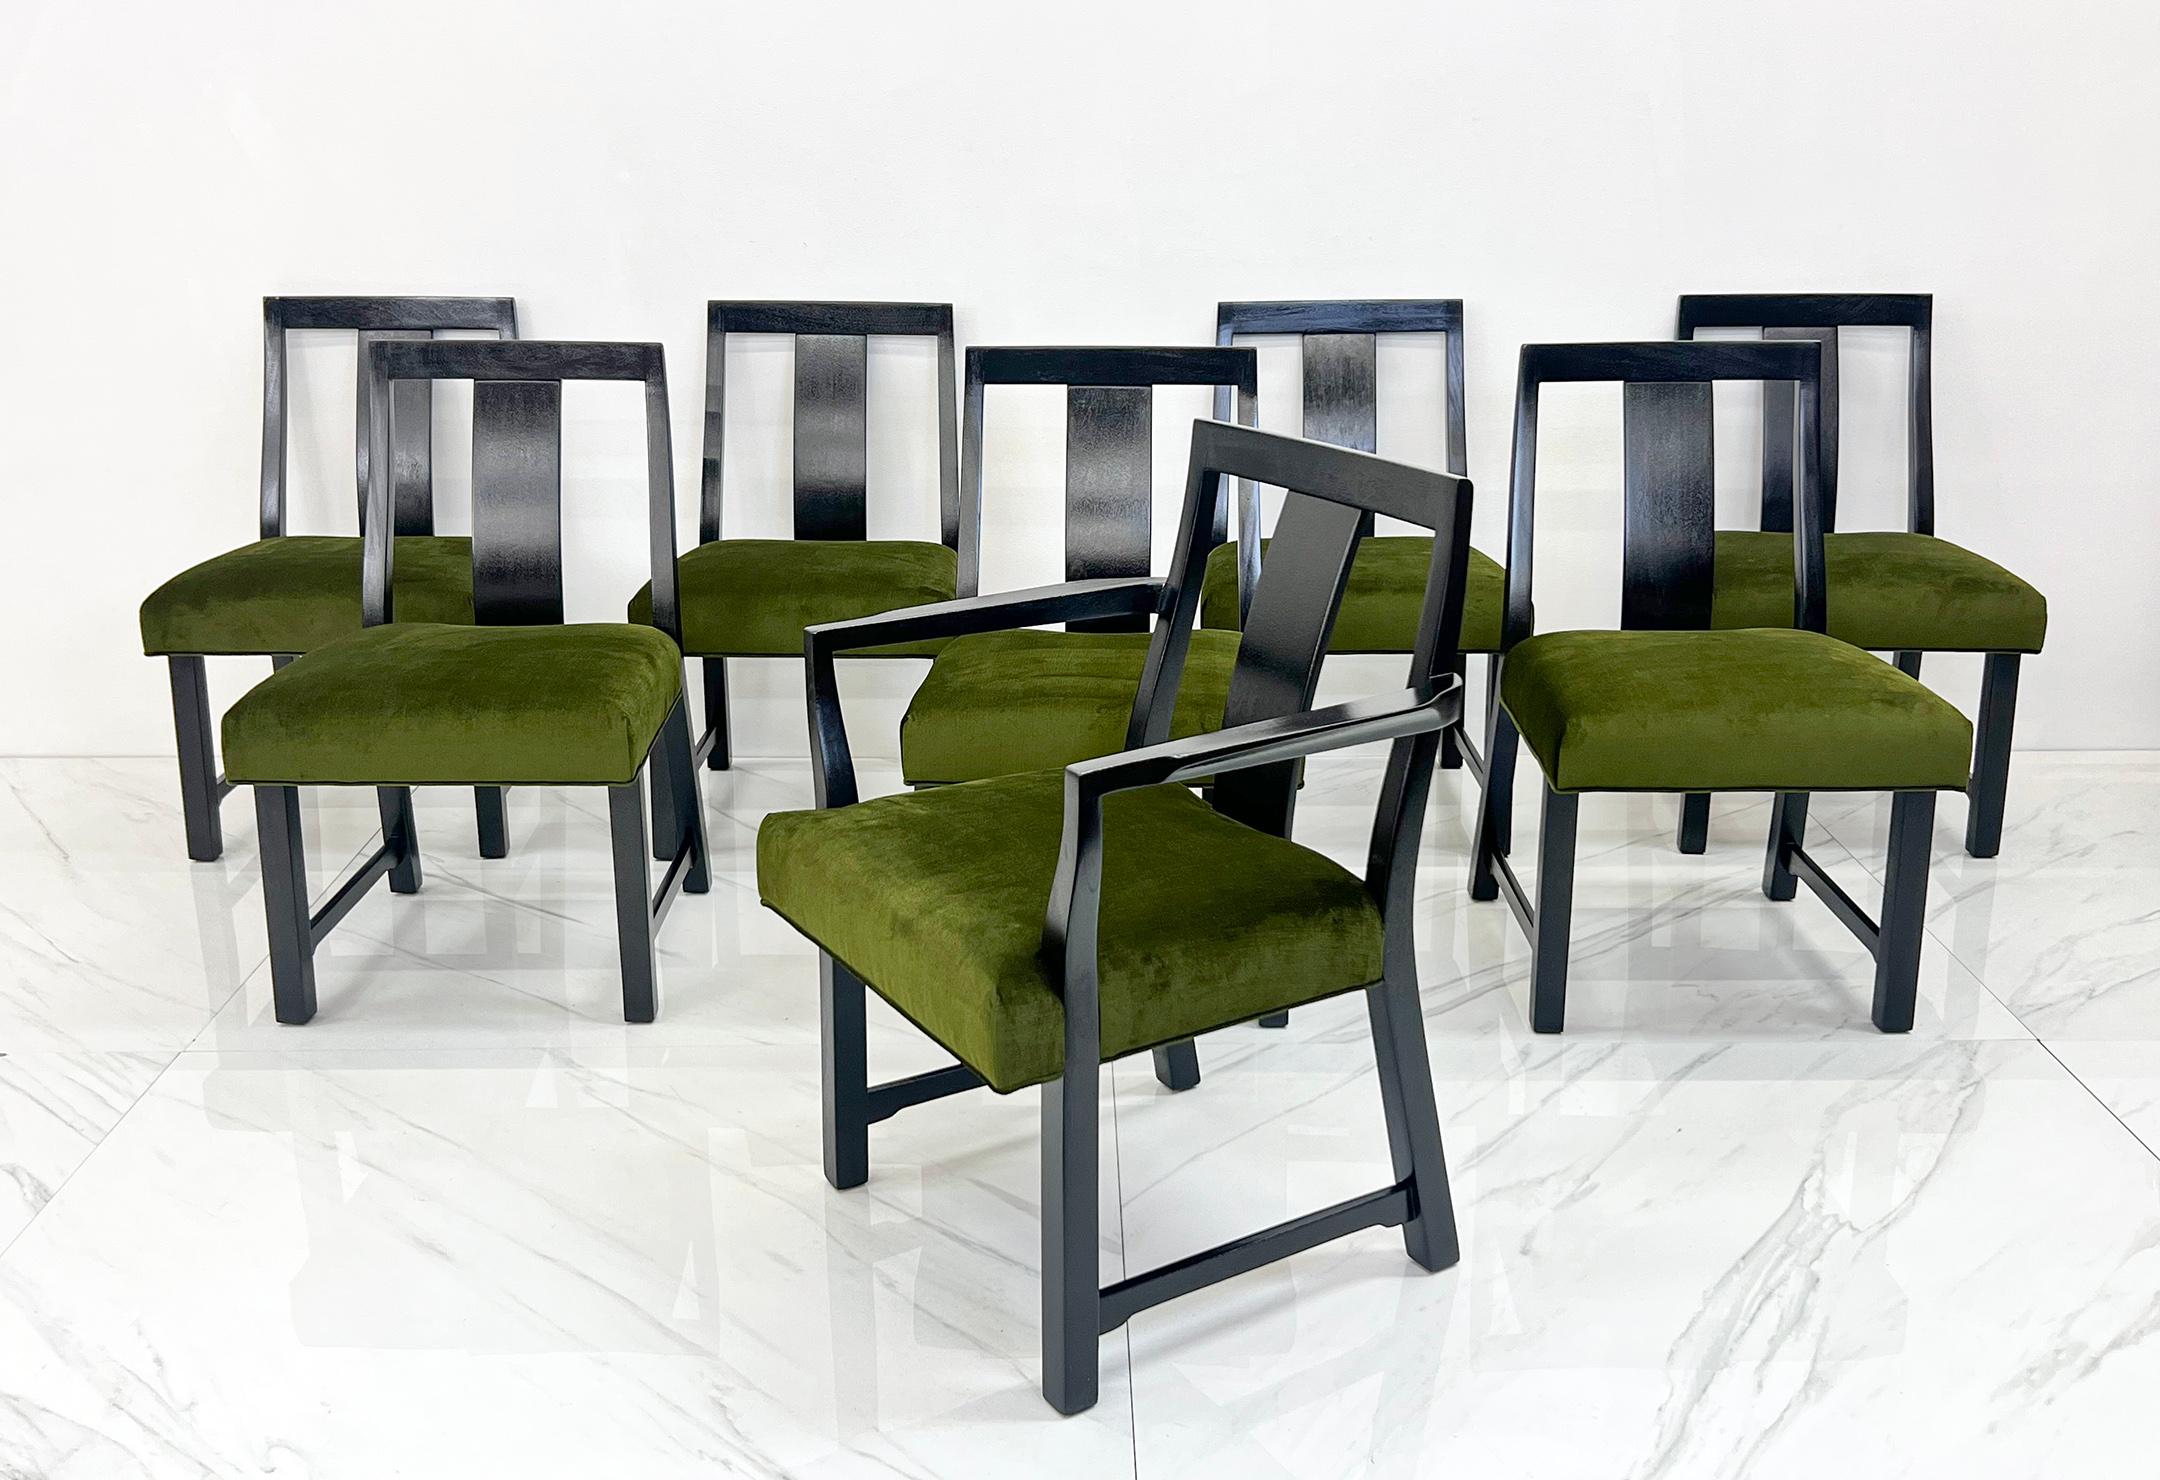 Mid-20th Century Ebonized Dining Set in Olive Velvet by Edward Wormley, Dunbar, 1950's For Sale